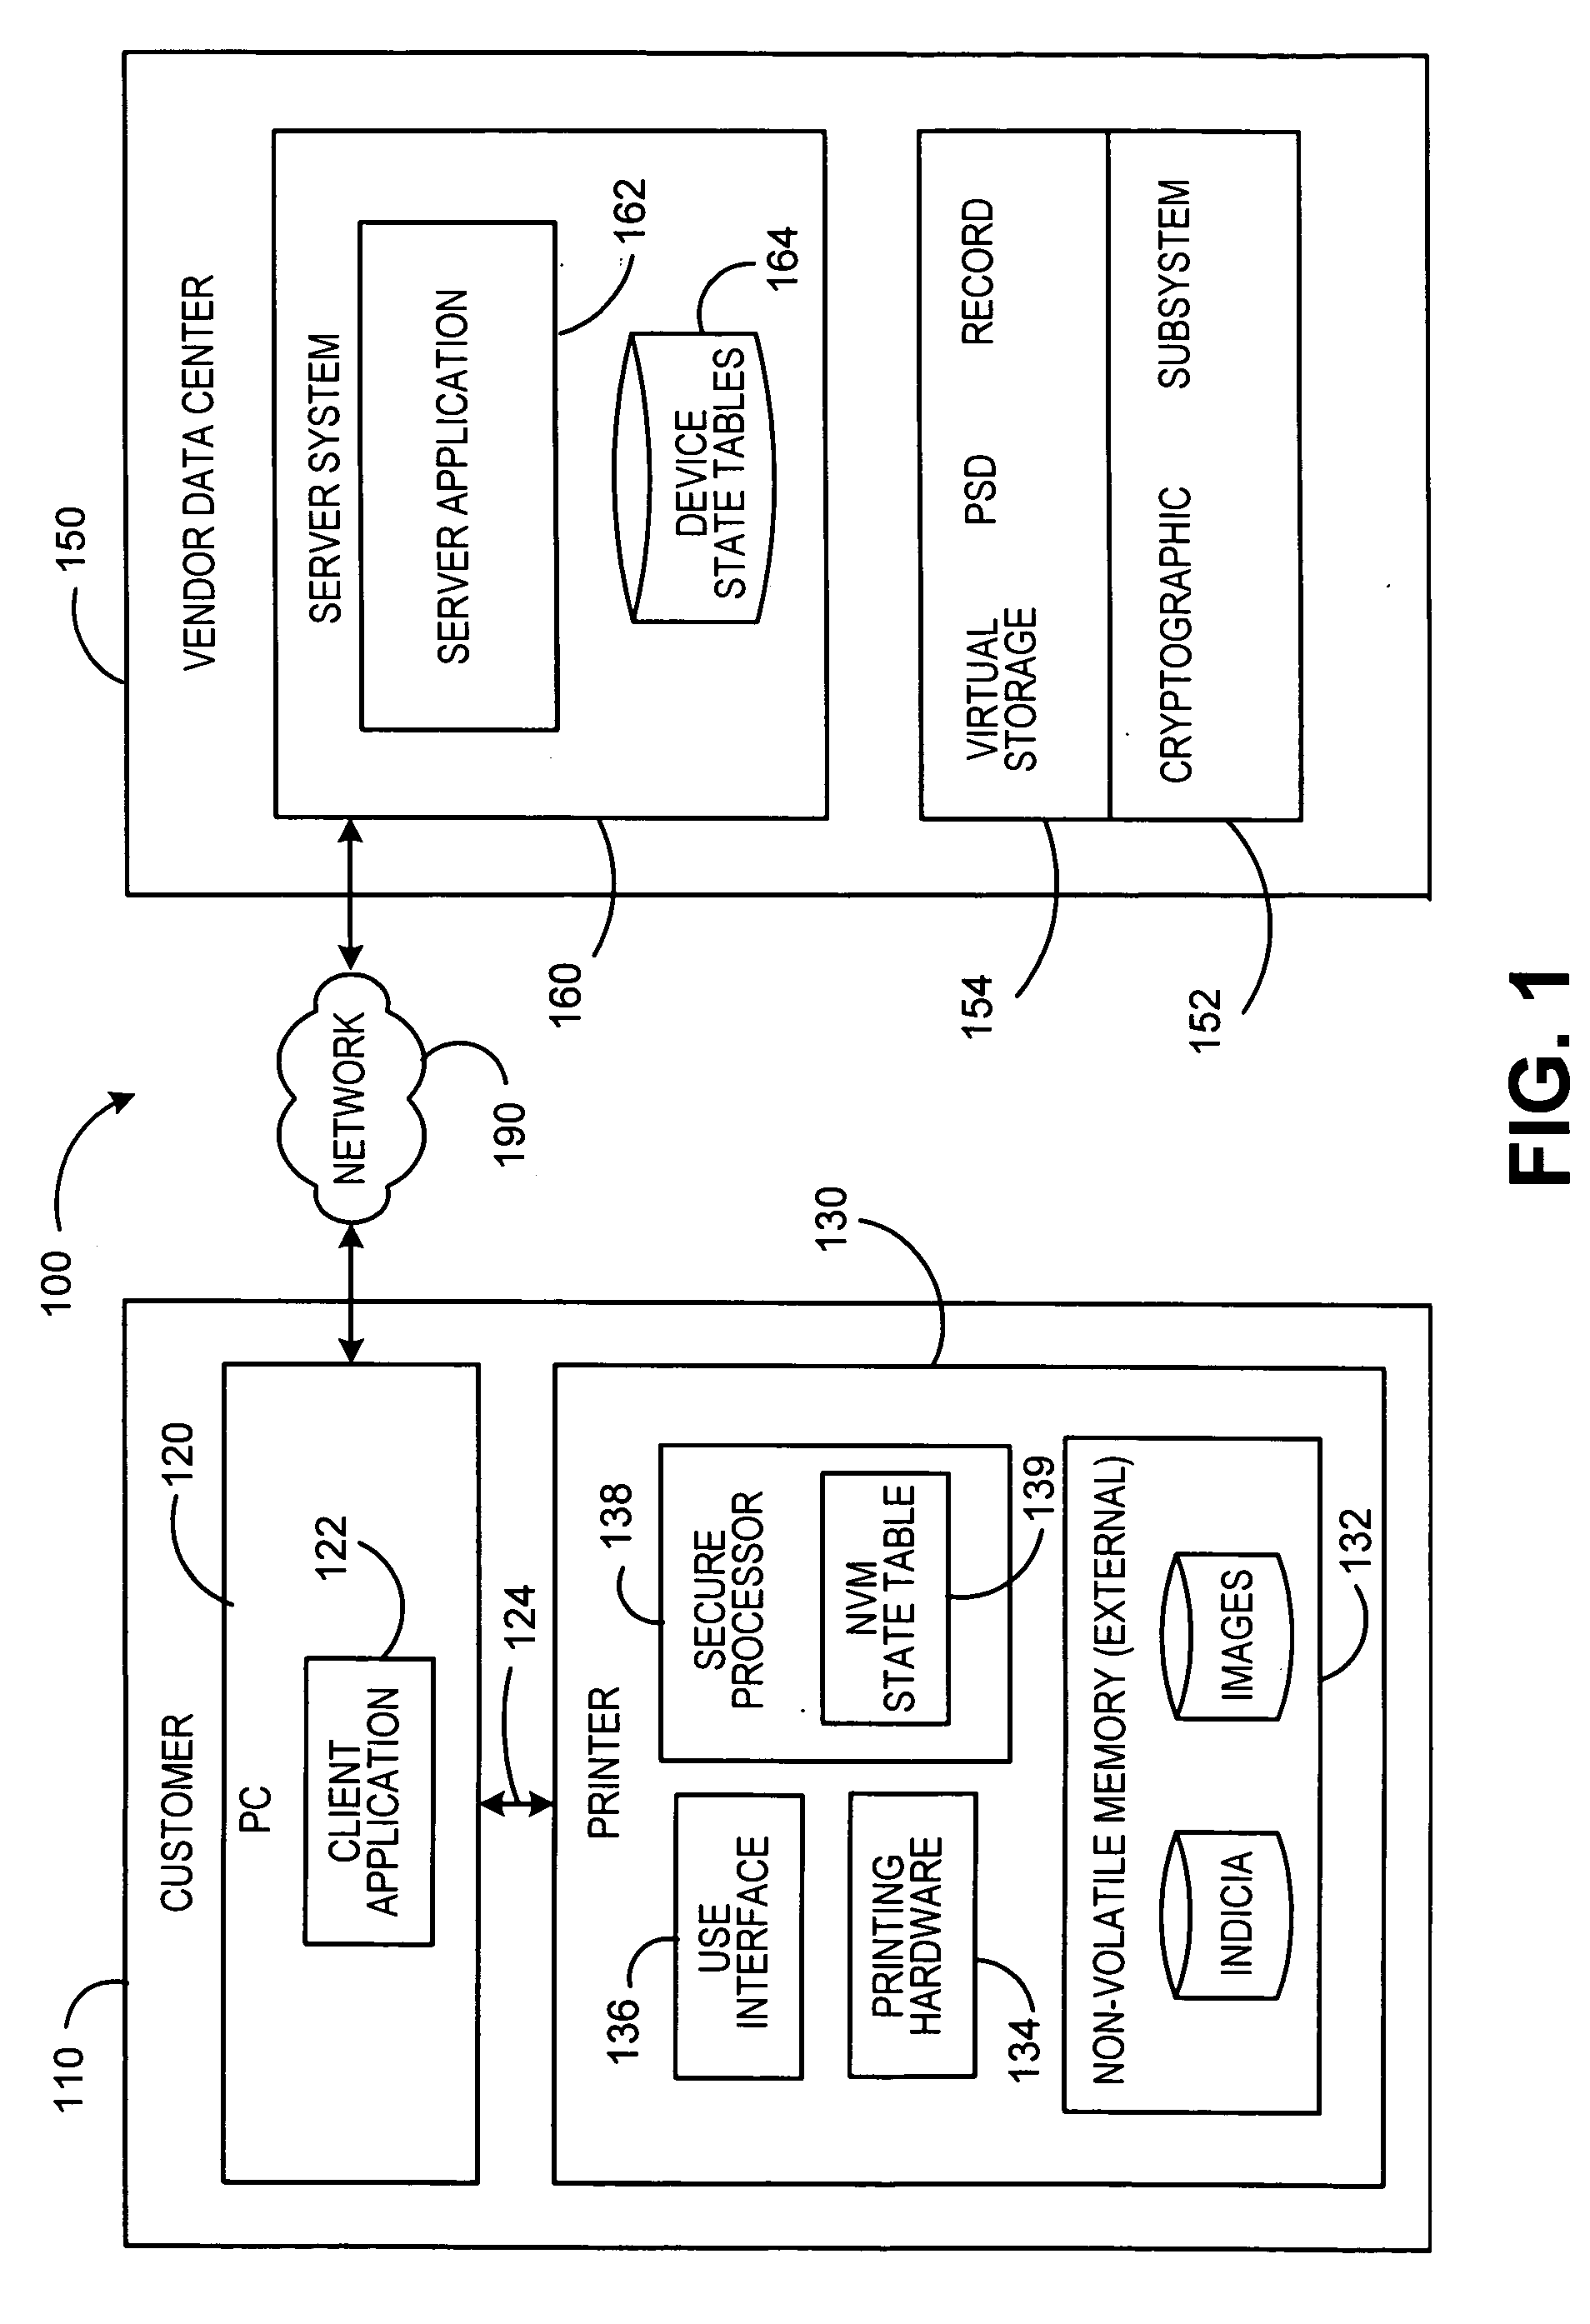 System and method for reliable transfer of virtual stamps